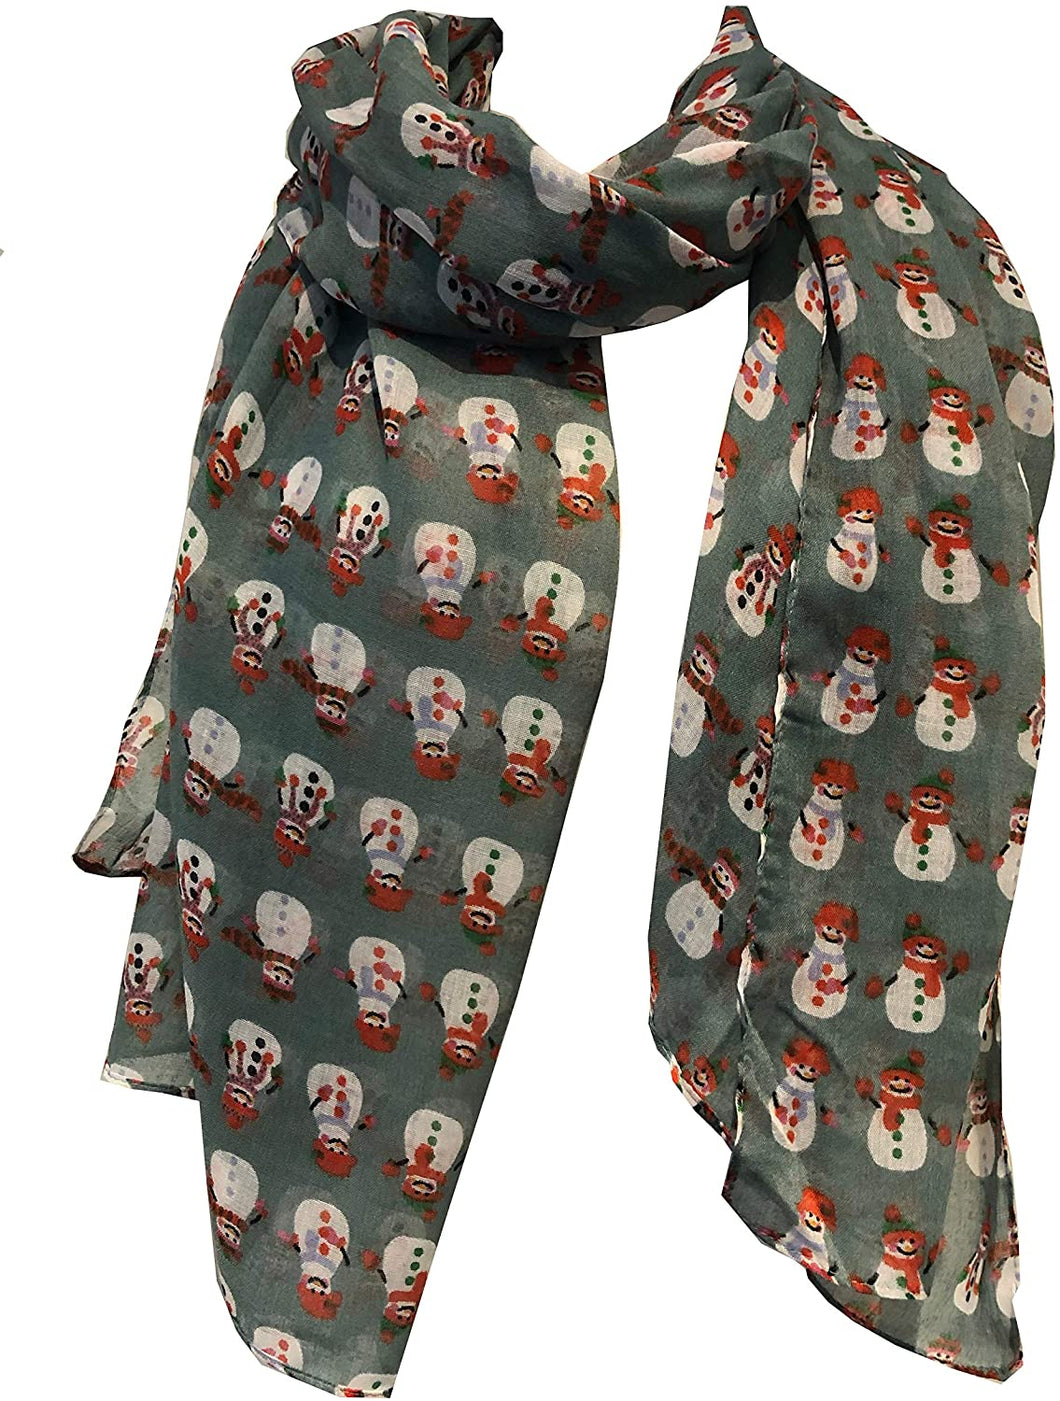 Green Snowman Design Ladies Scarf. Great Christmas Scarf/wrap Lovely Present.